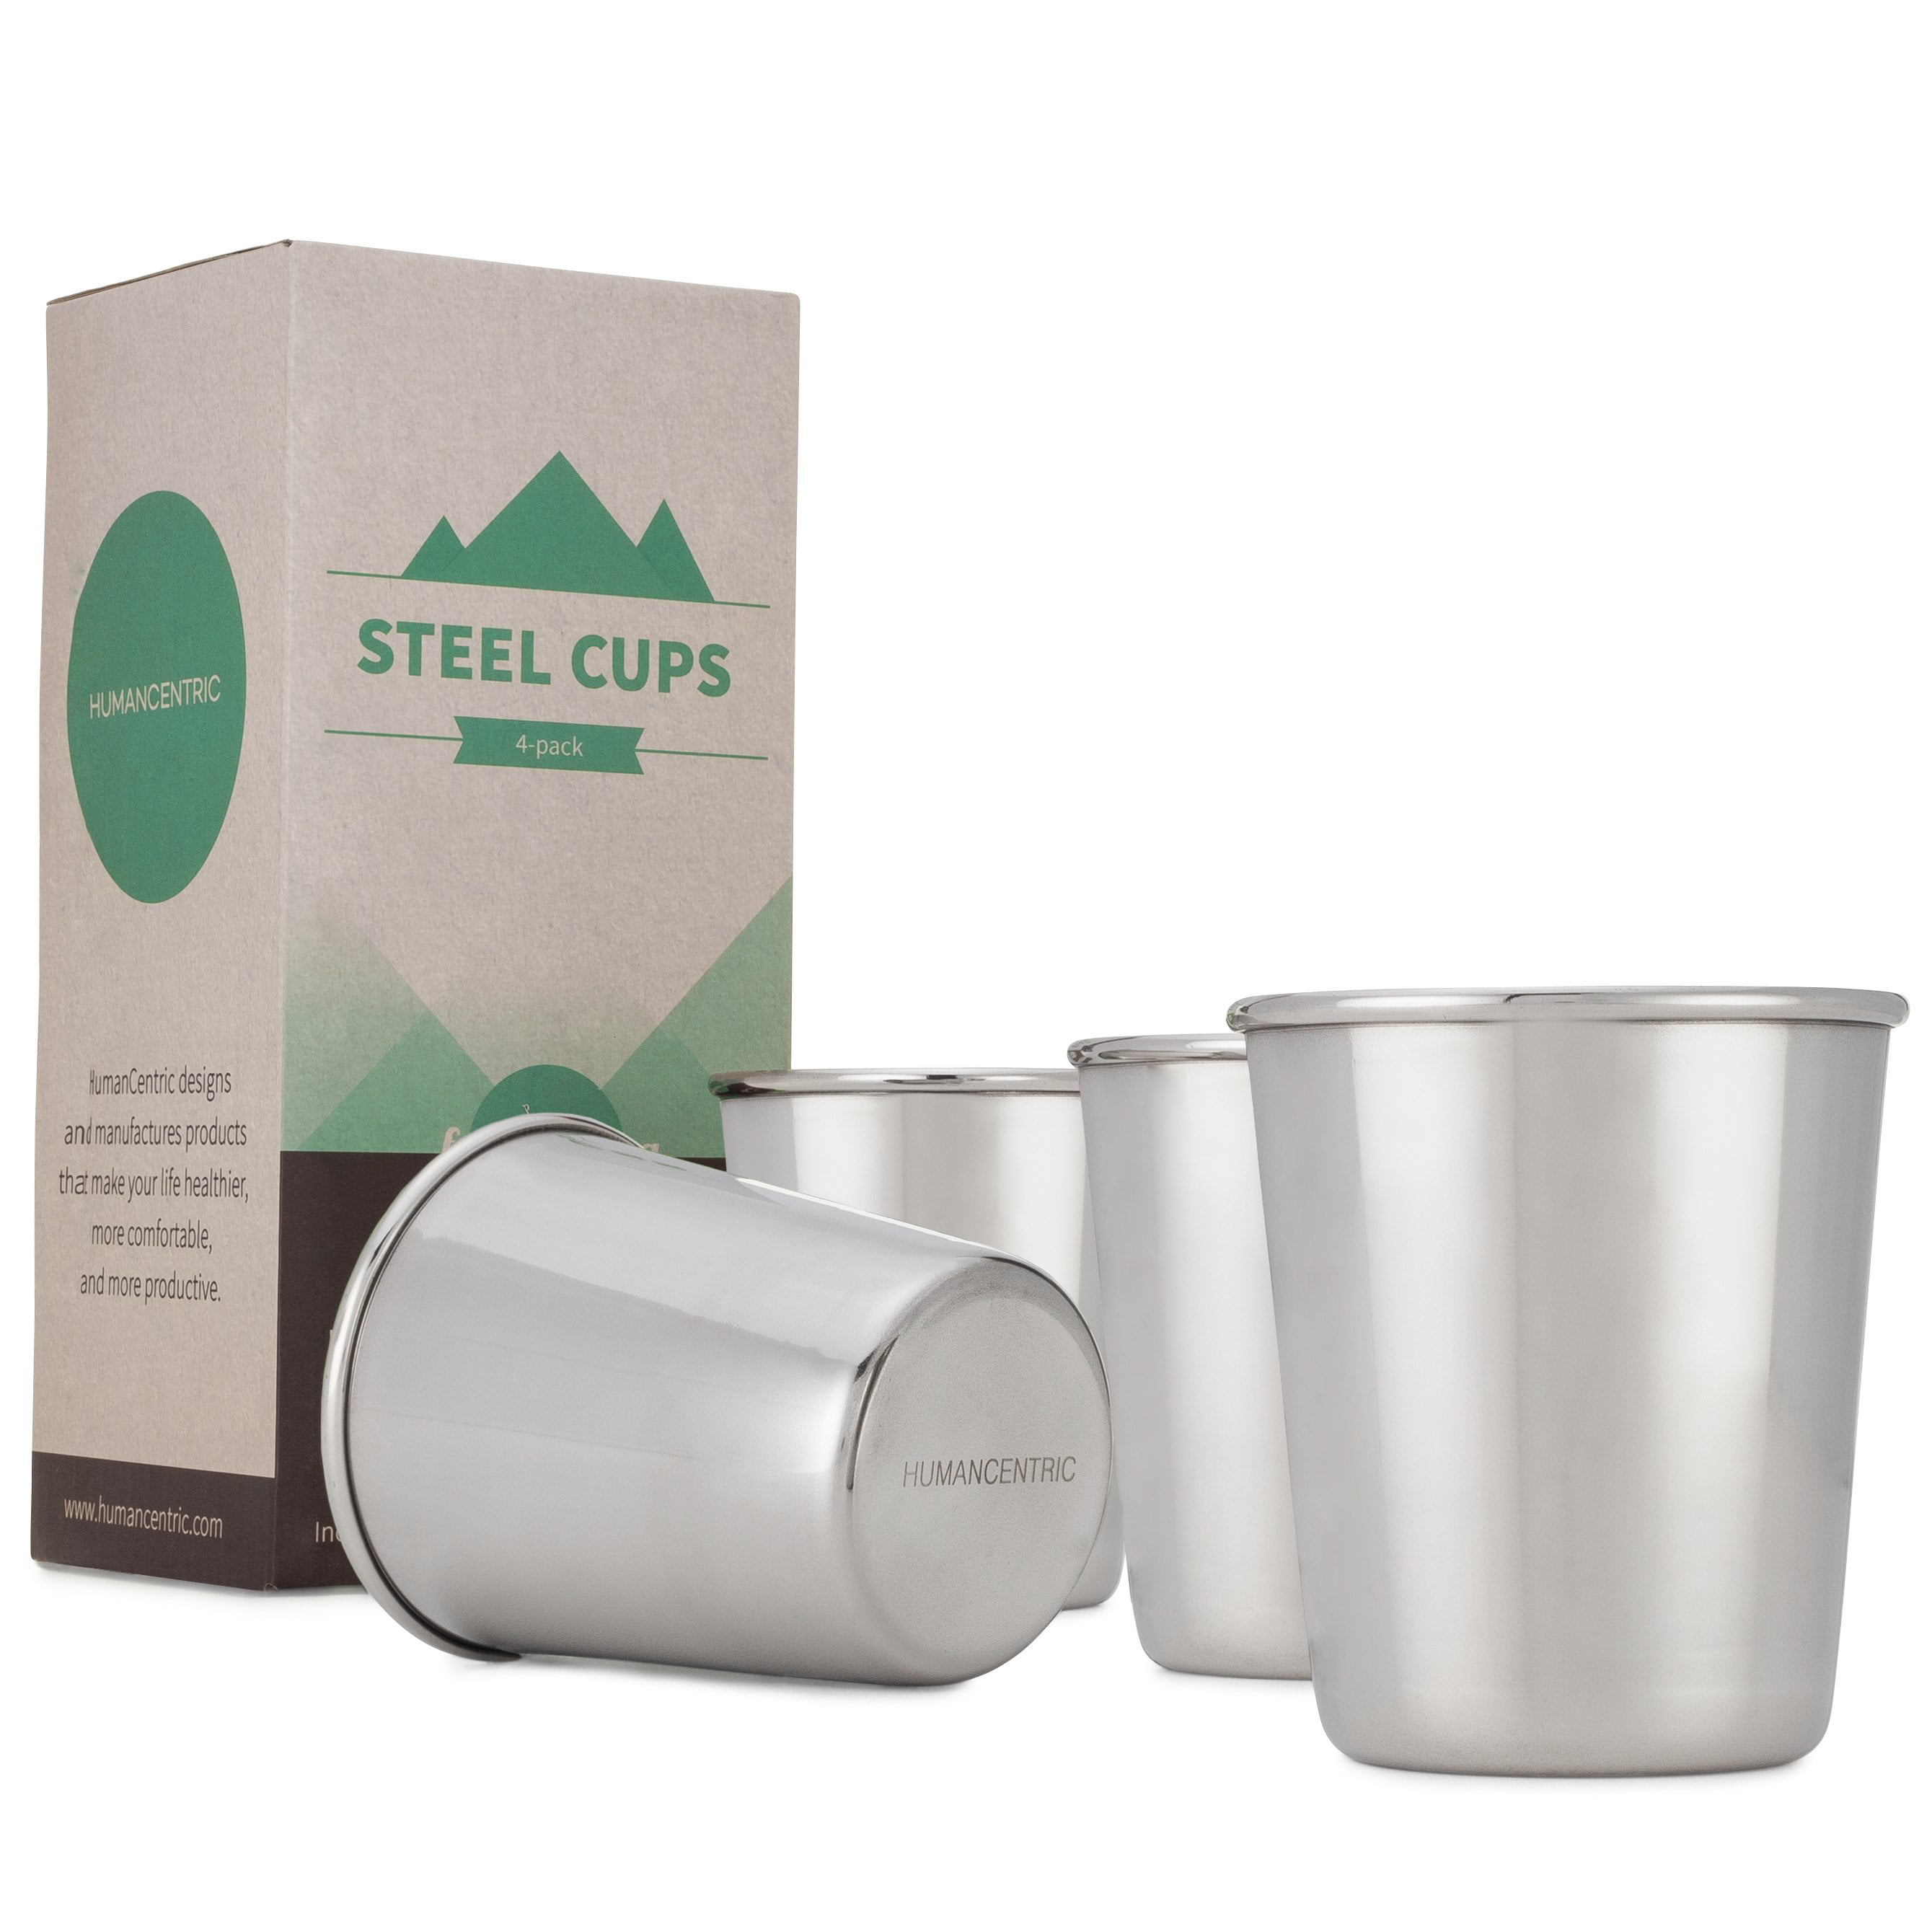 Stainless Steel Cups, 8 oz Cup (Set of 4) - Compact and Convenient Size